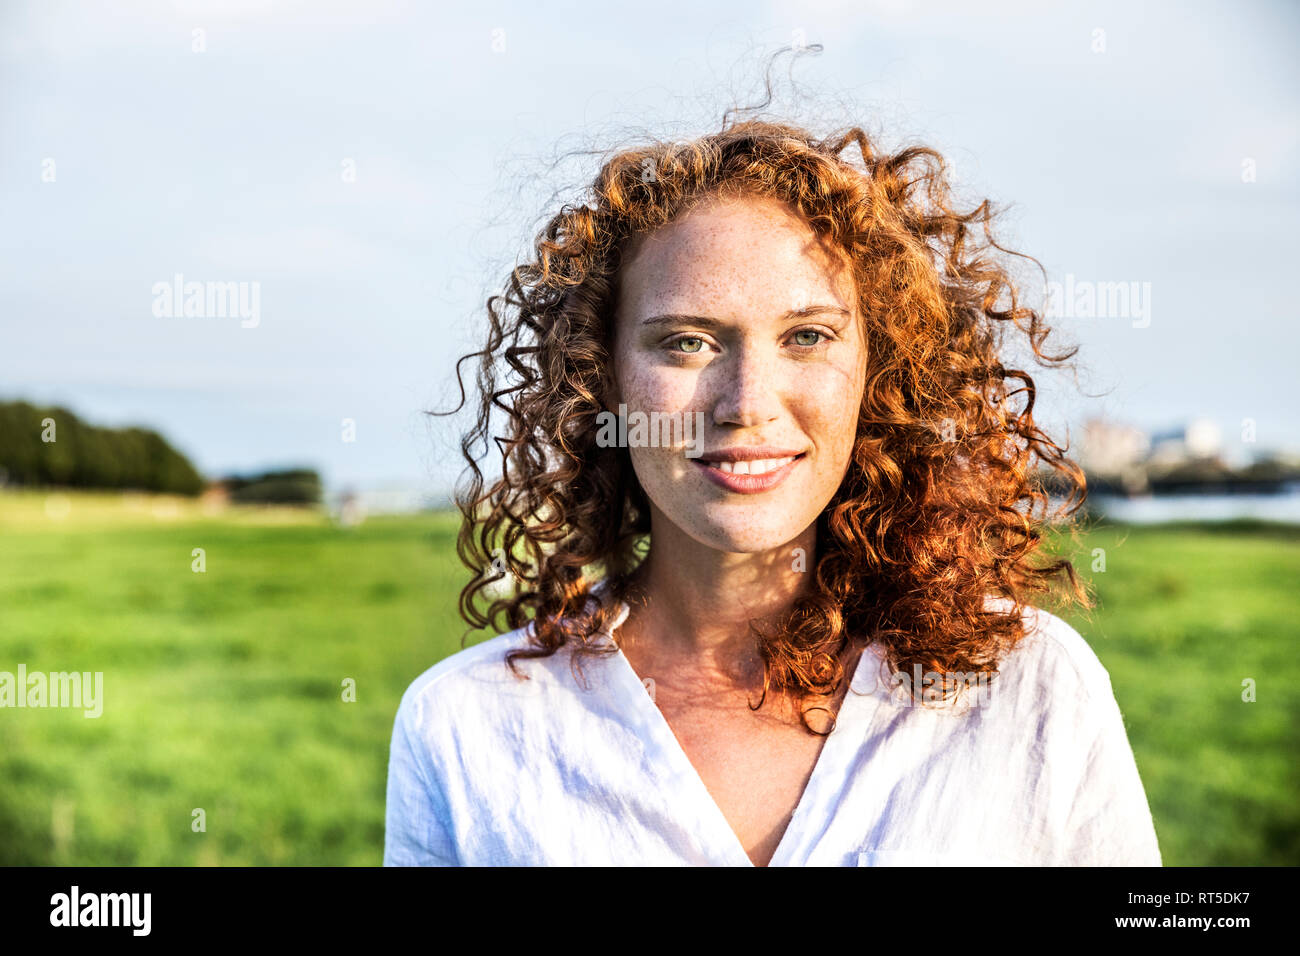 Portrait of freckled young woman with curly red hair Stock Photo